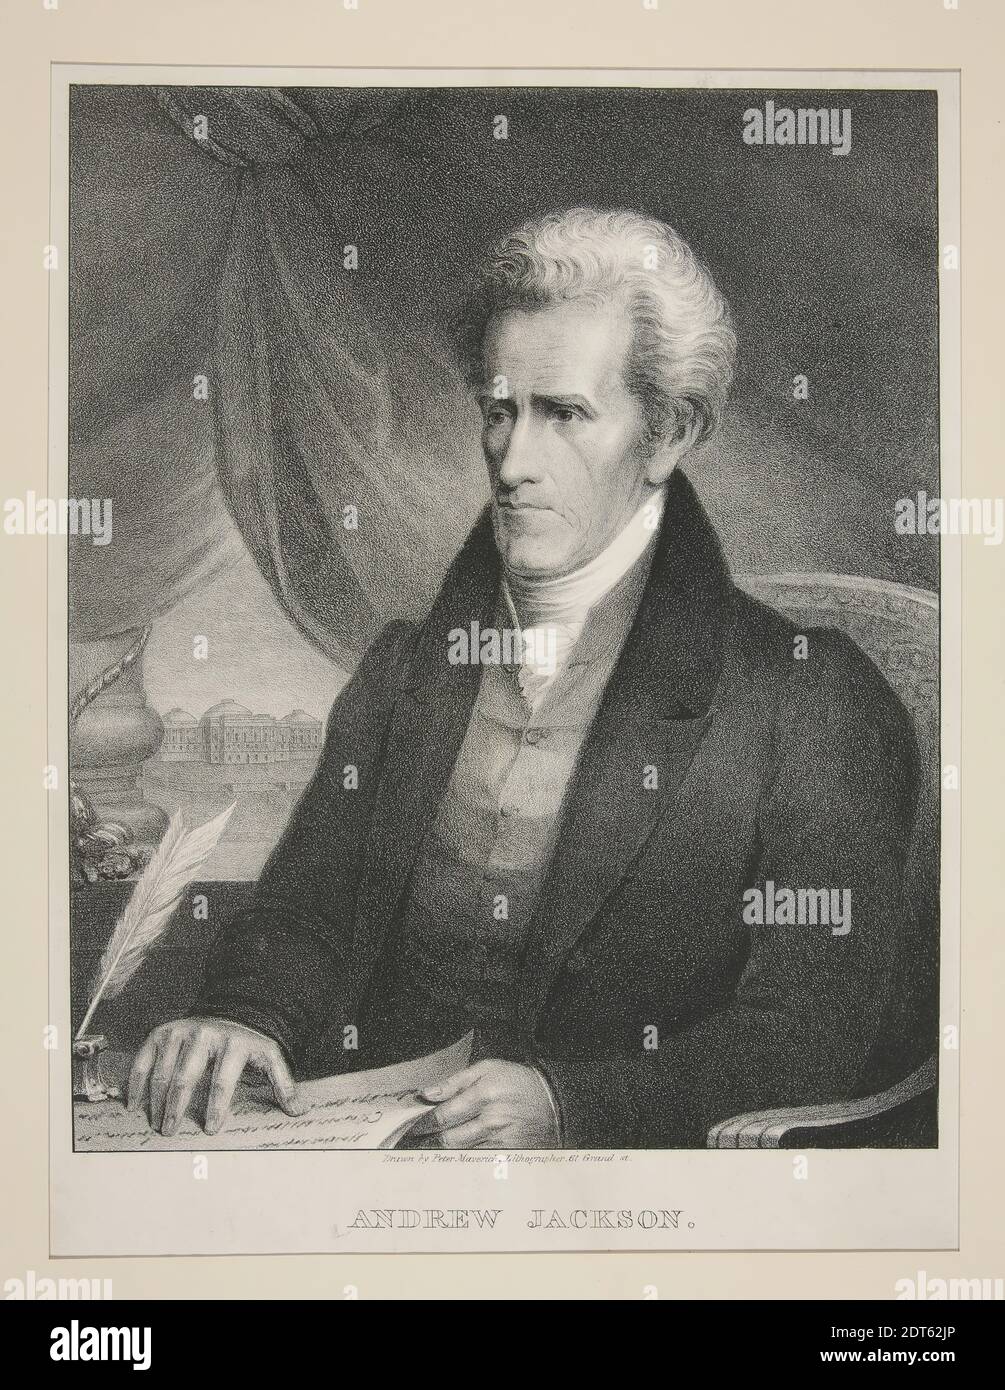 Artist: Peter Rushton Maverick, American, 1755–1811, Andrew Jackson, Lithograph, black and white, sheet: 36 × 27.3 cm (14 3/16 × 10 3/4 in.), Made in United States, American, 19th century, Works on Paper - Prints Stock Photo